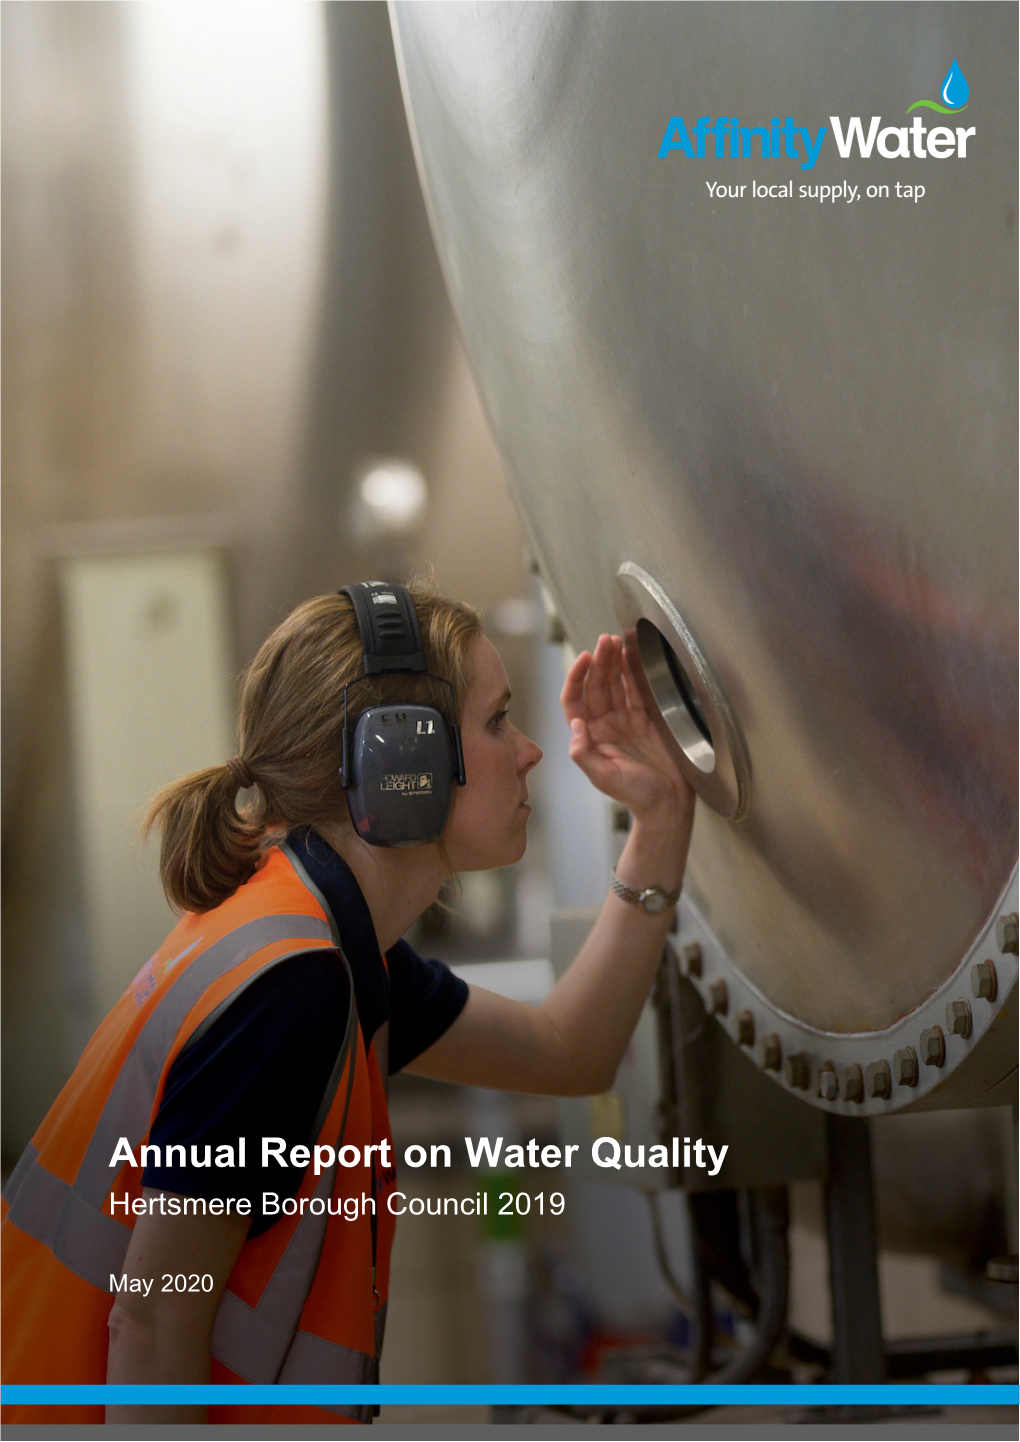 Affinity Water's Annual Report on Water Quality in Hertsmere 2019 (PDF 17.14Mb)